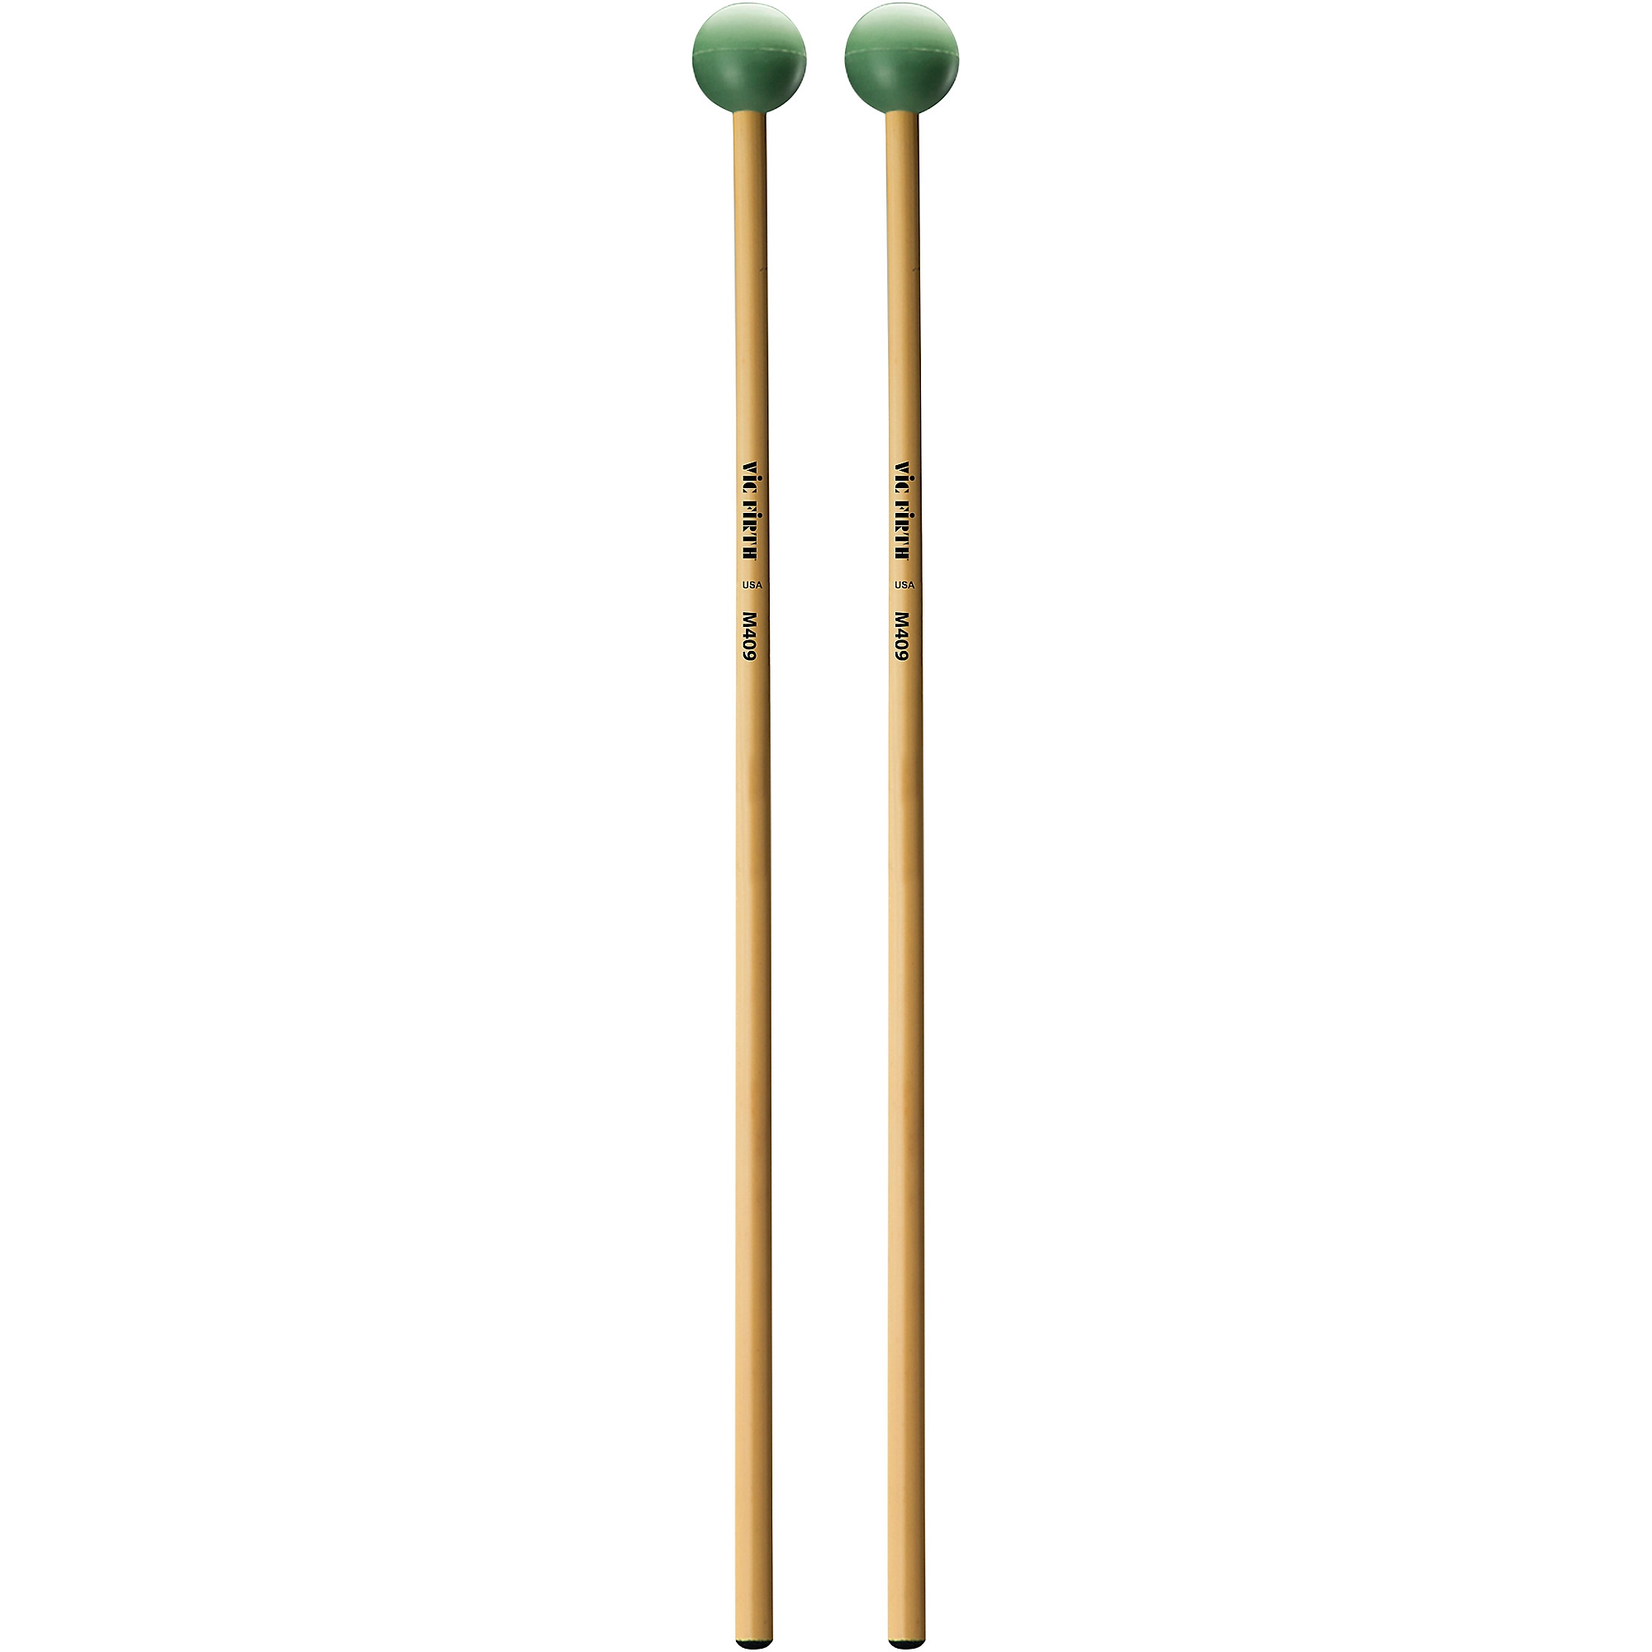 Vic Firth Vic Firth Articulate Series Keyboard Mallet - Medium Rubber, Round M409